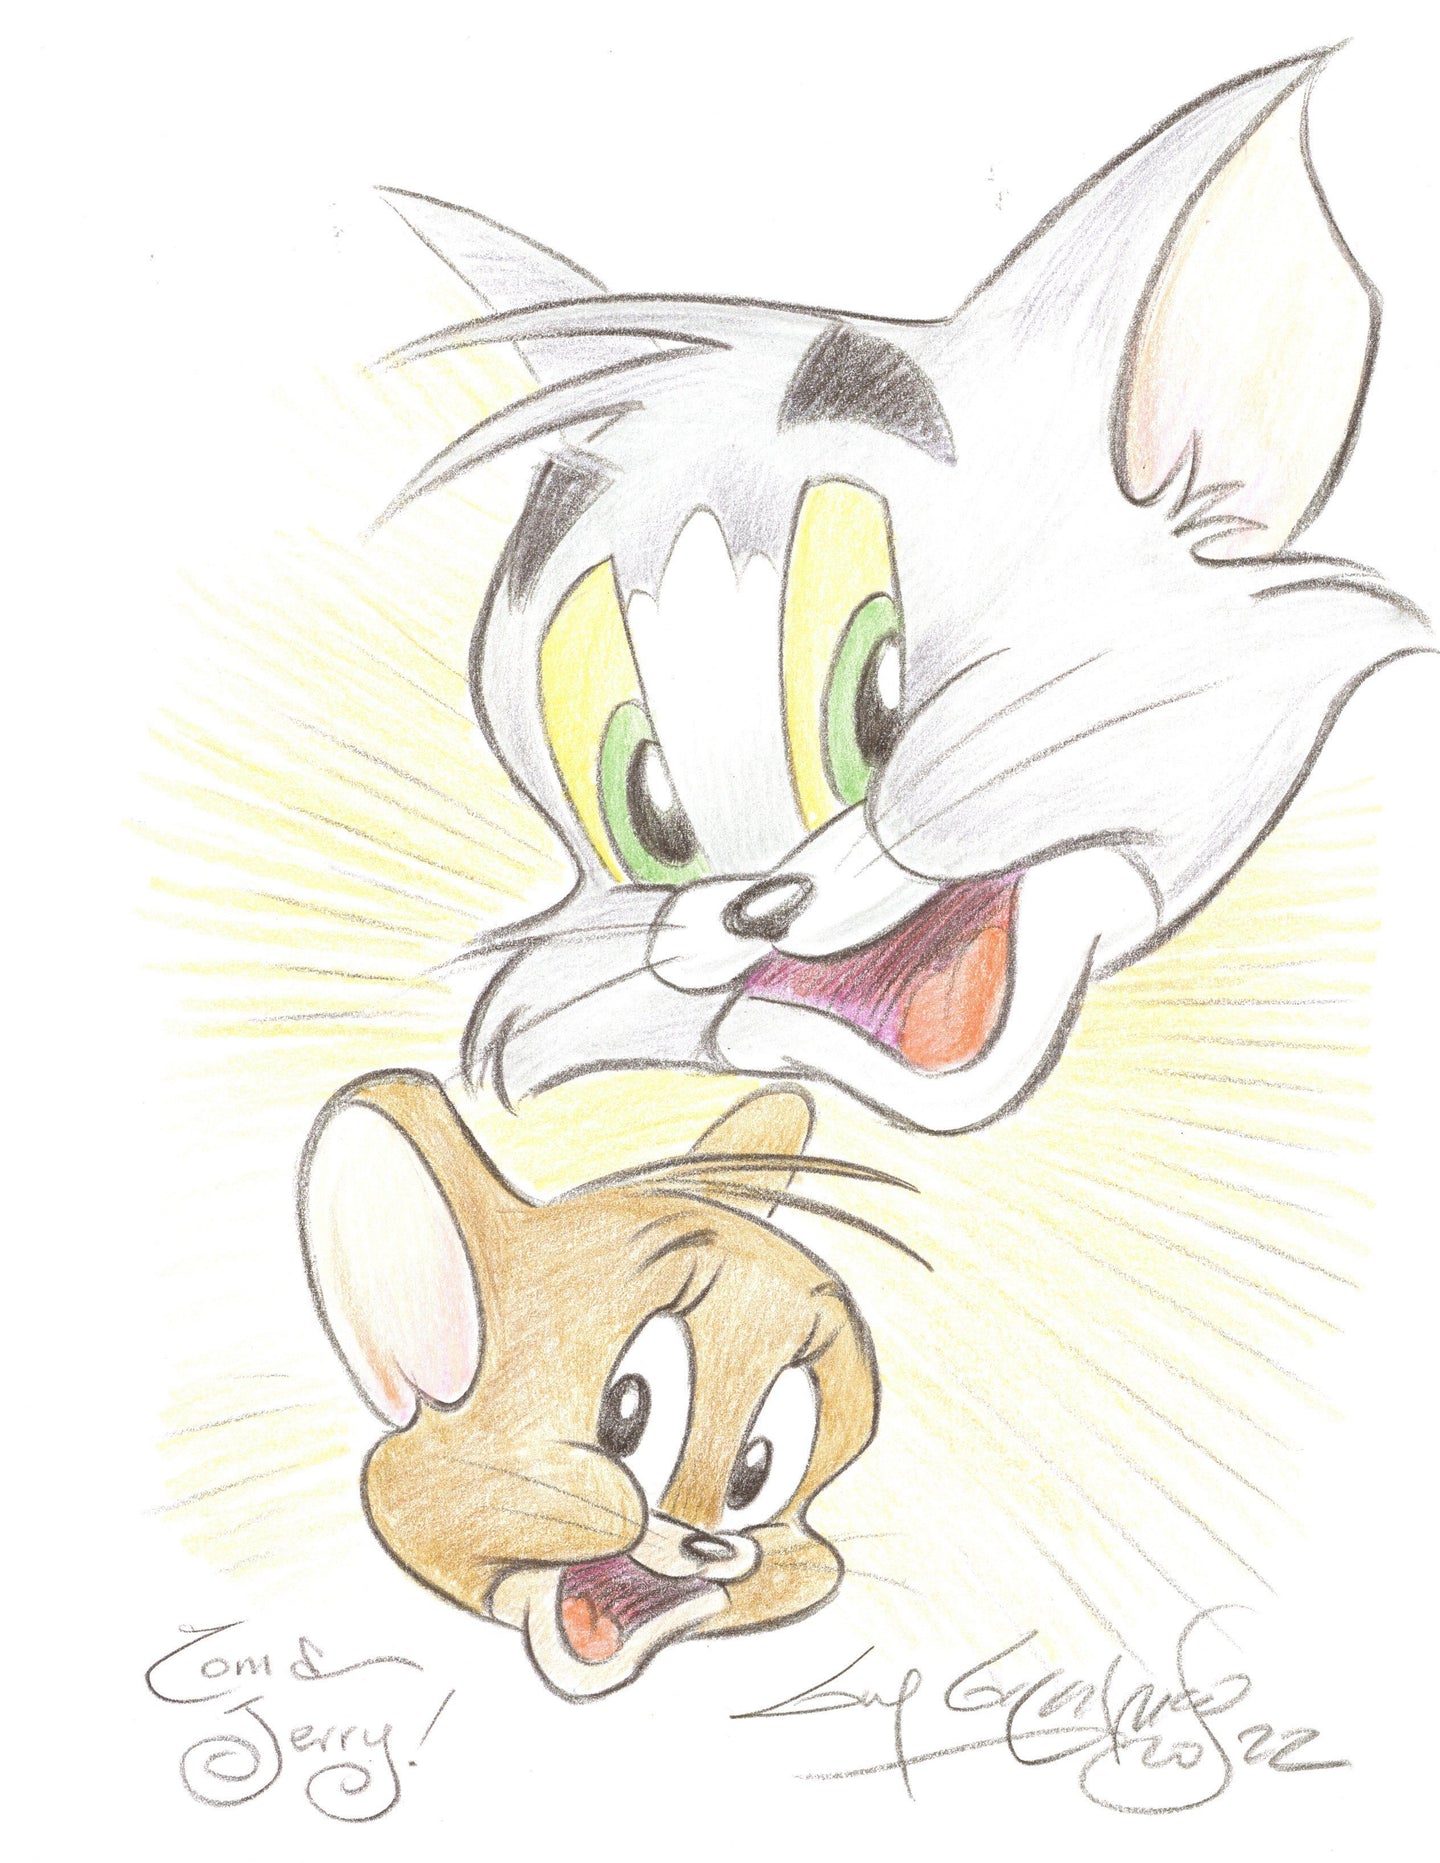 Tom & Jerry Original Art 8.5x11 Sketch - Created by Guy Gilchrist